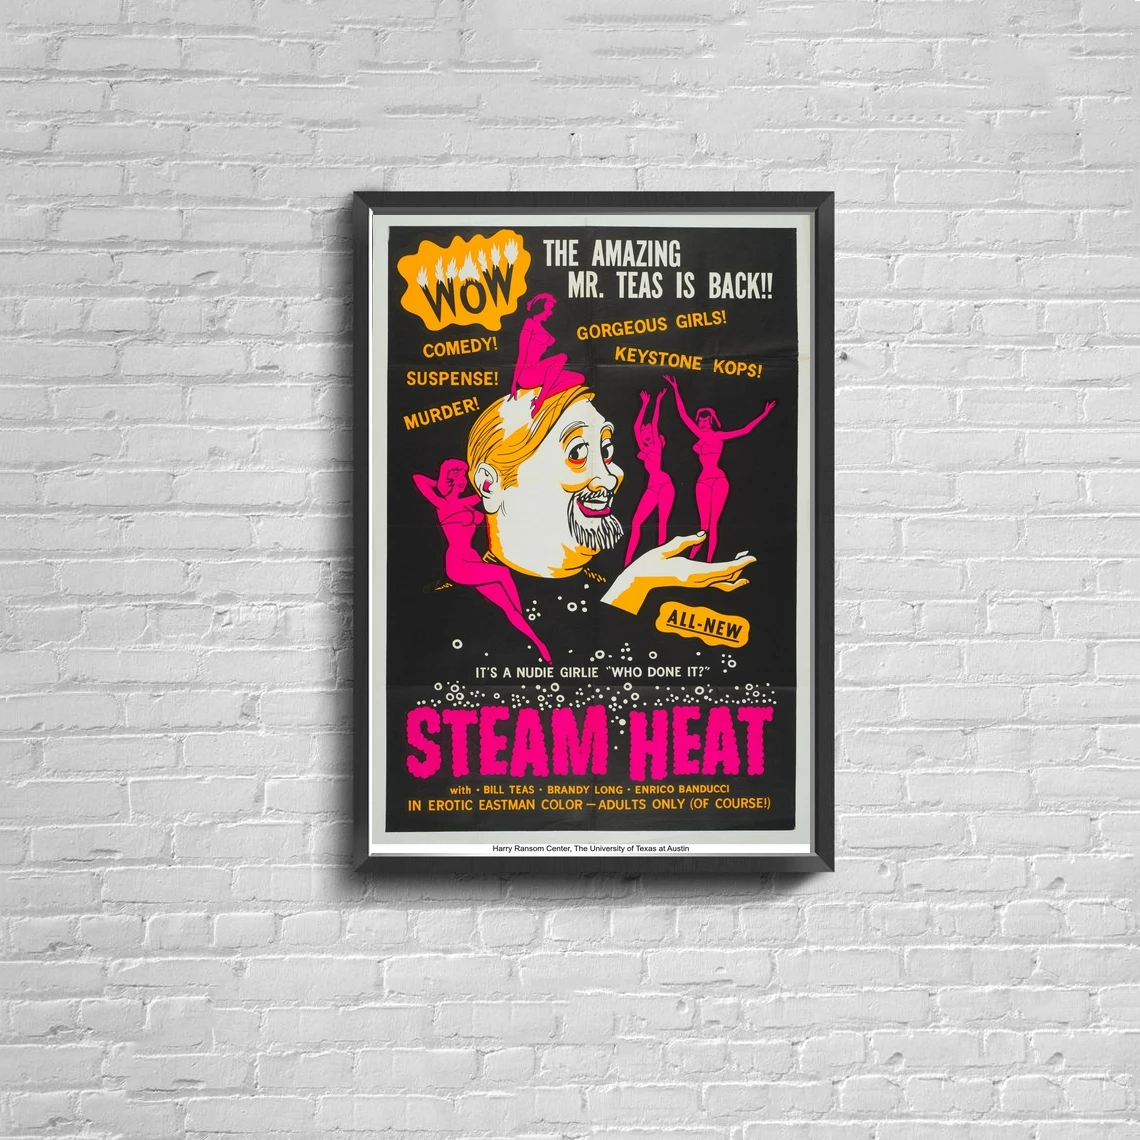 All about steam heat фото 33